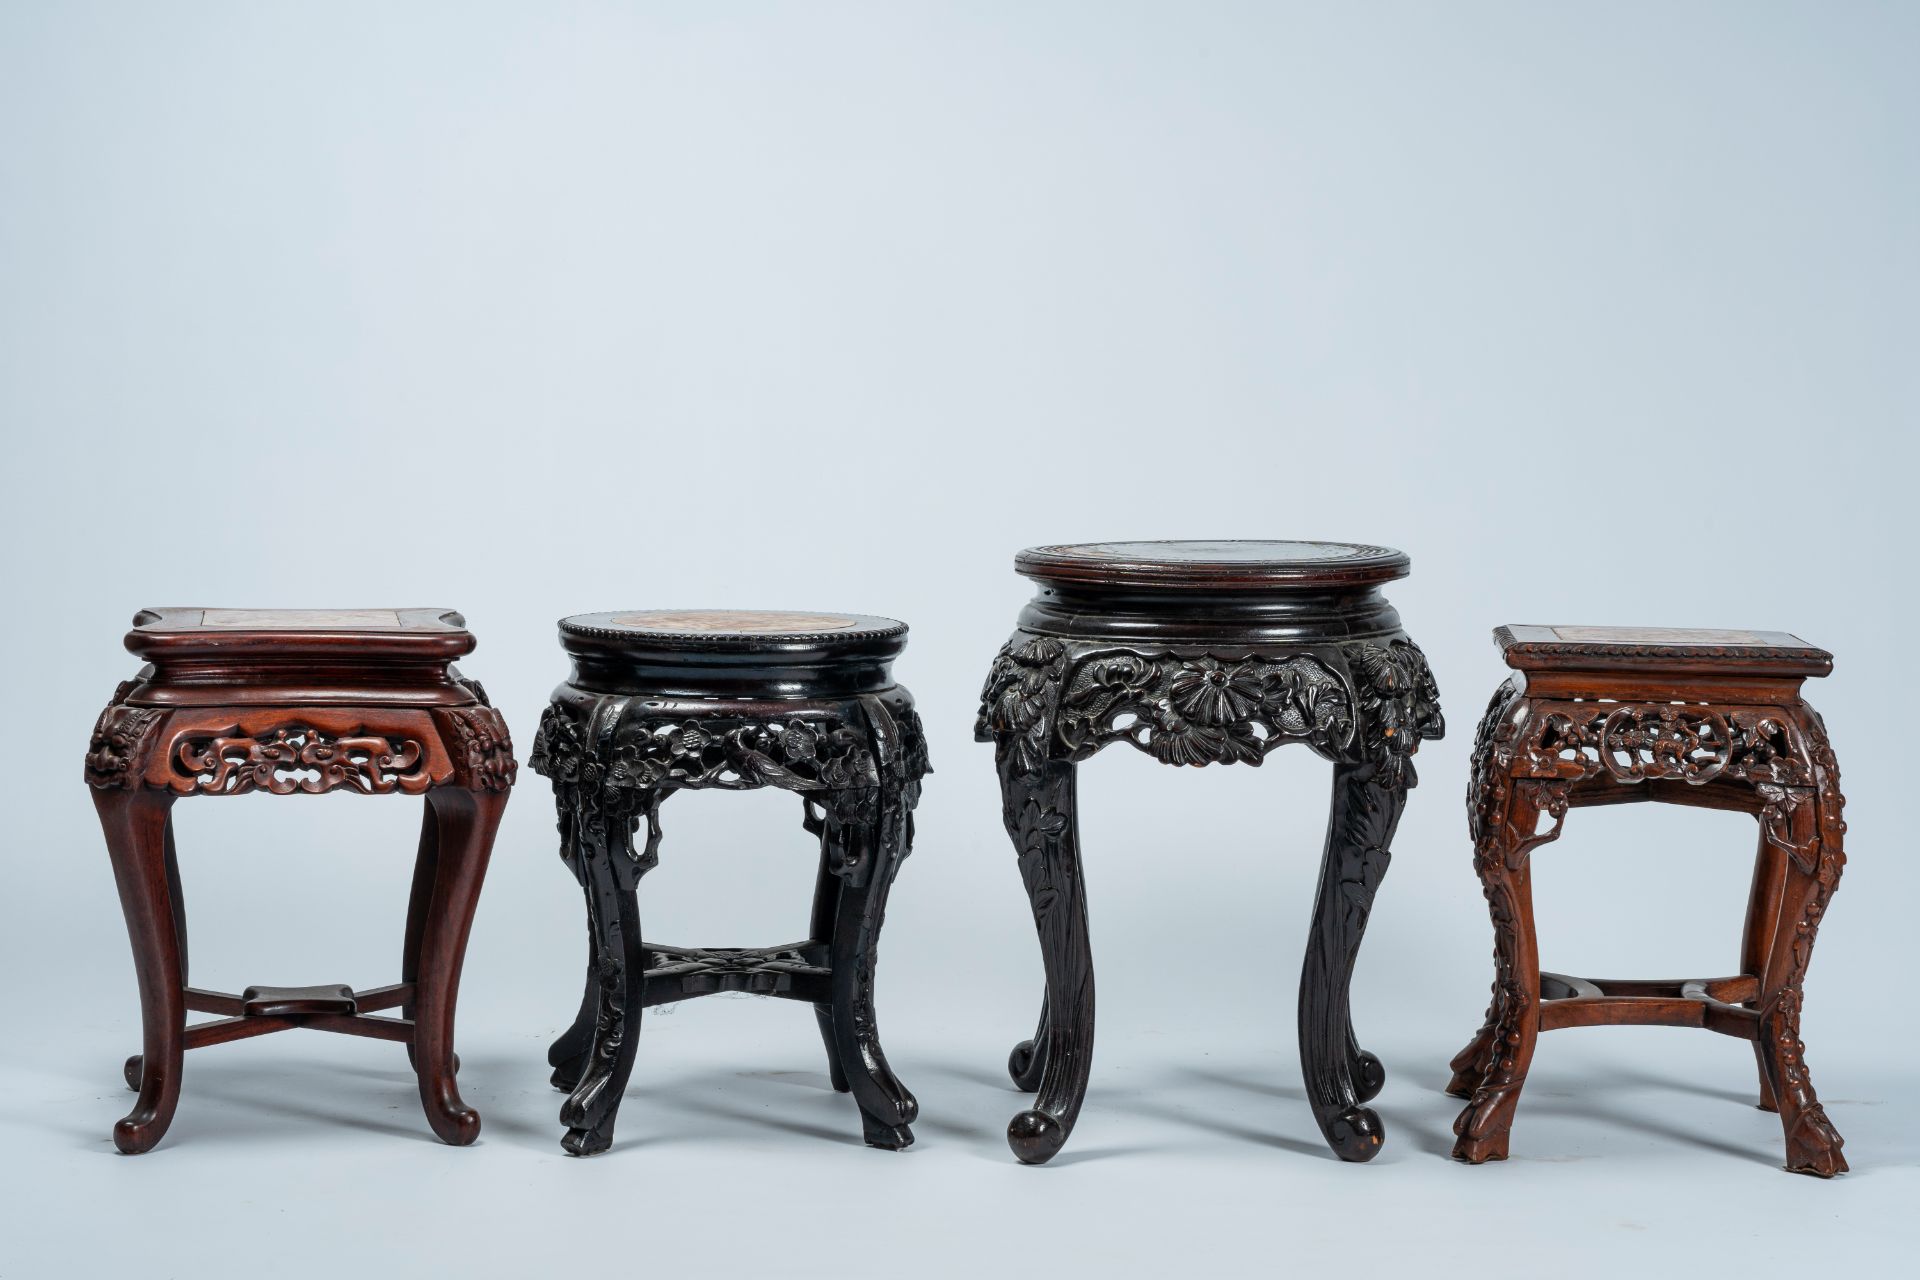 Four Chinese and Japanese open worked carved wood stands with marble and wood top, 20th C. - Image 4 of 7